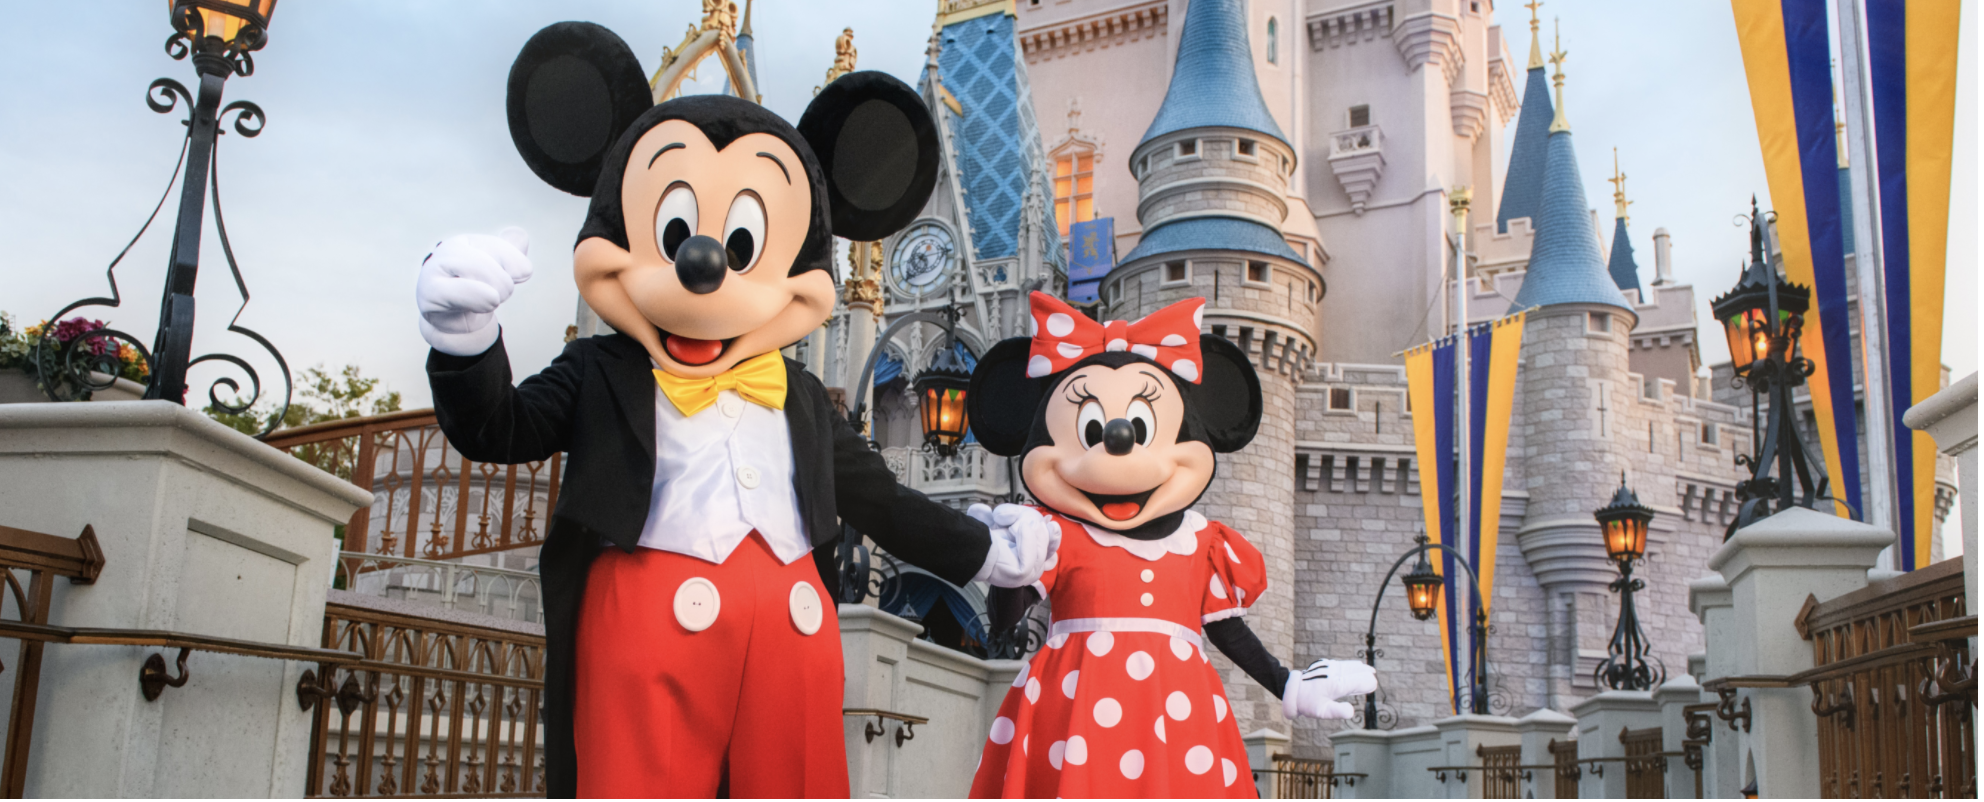 Want to stay amazingly well informed about Disney travel?